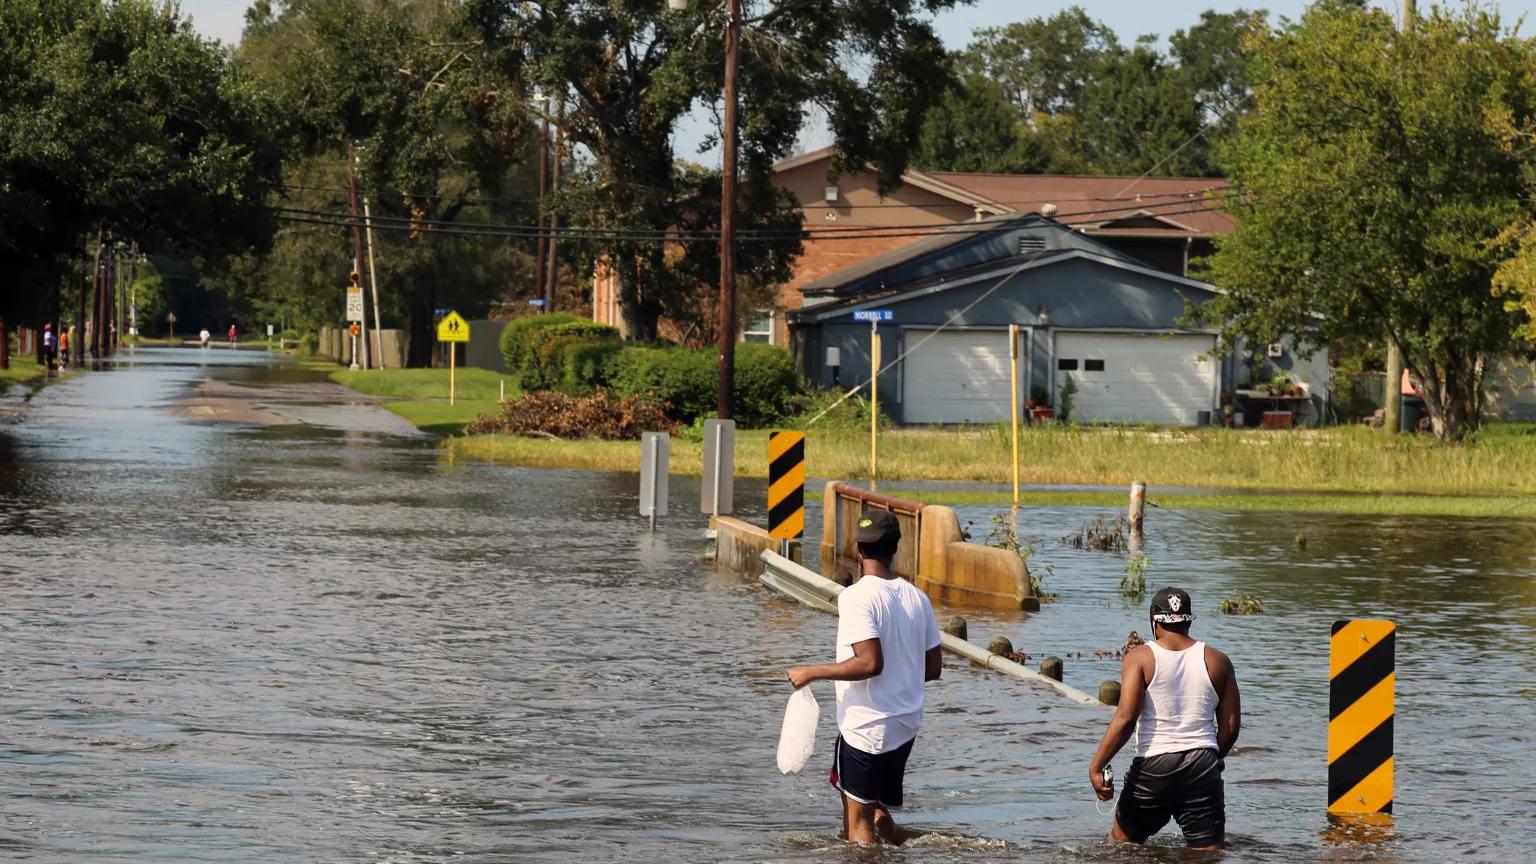 Two people wading through a flooded street in a residential area